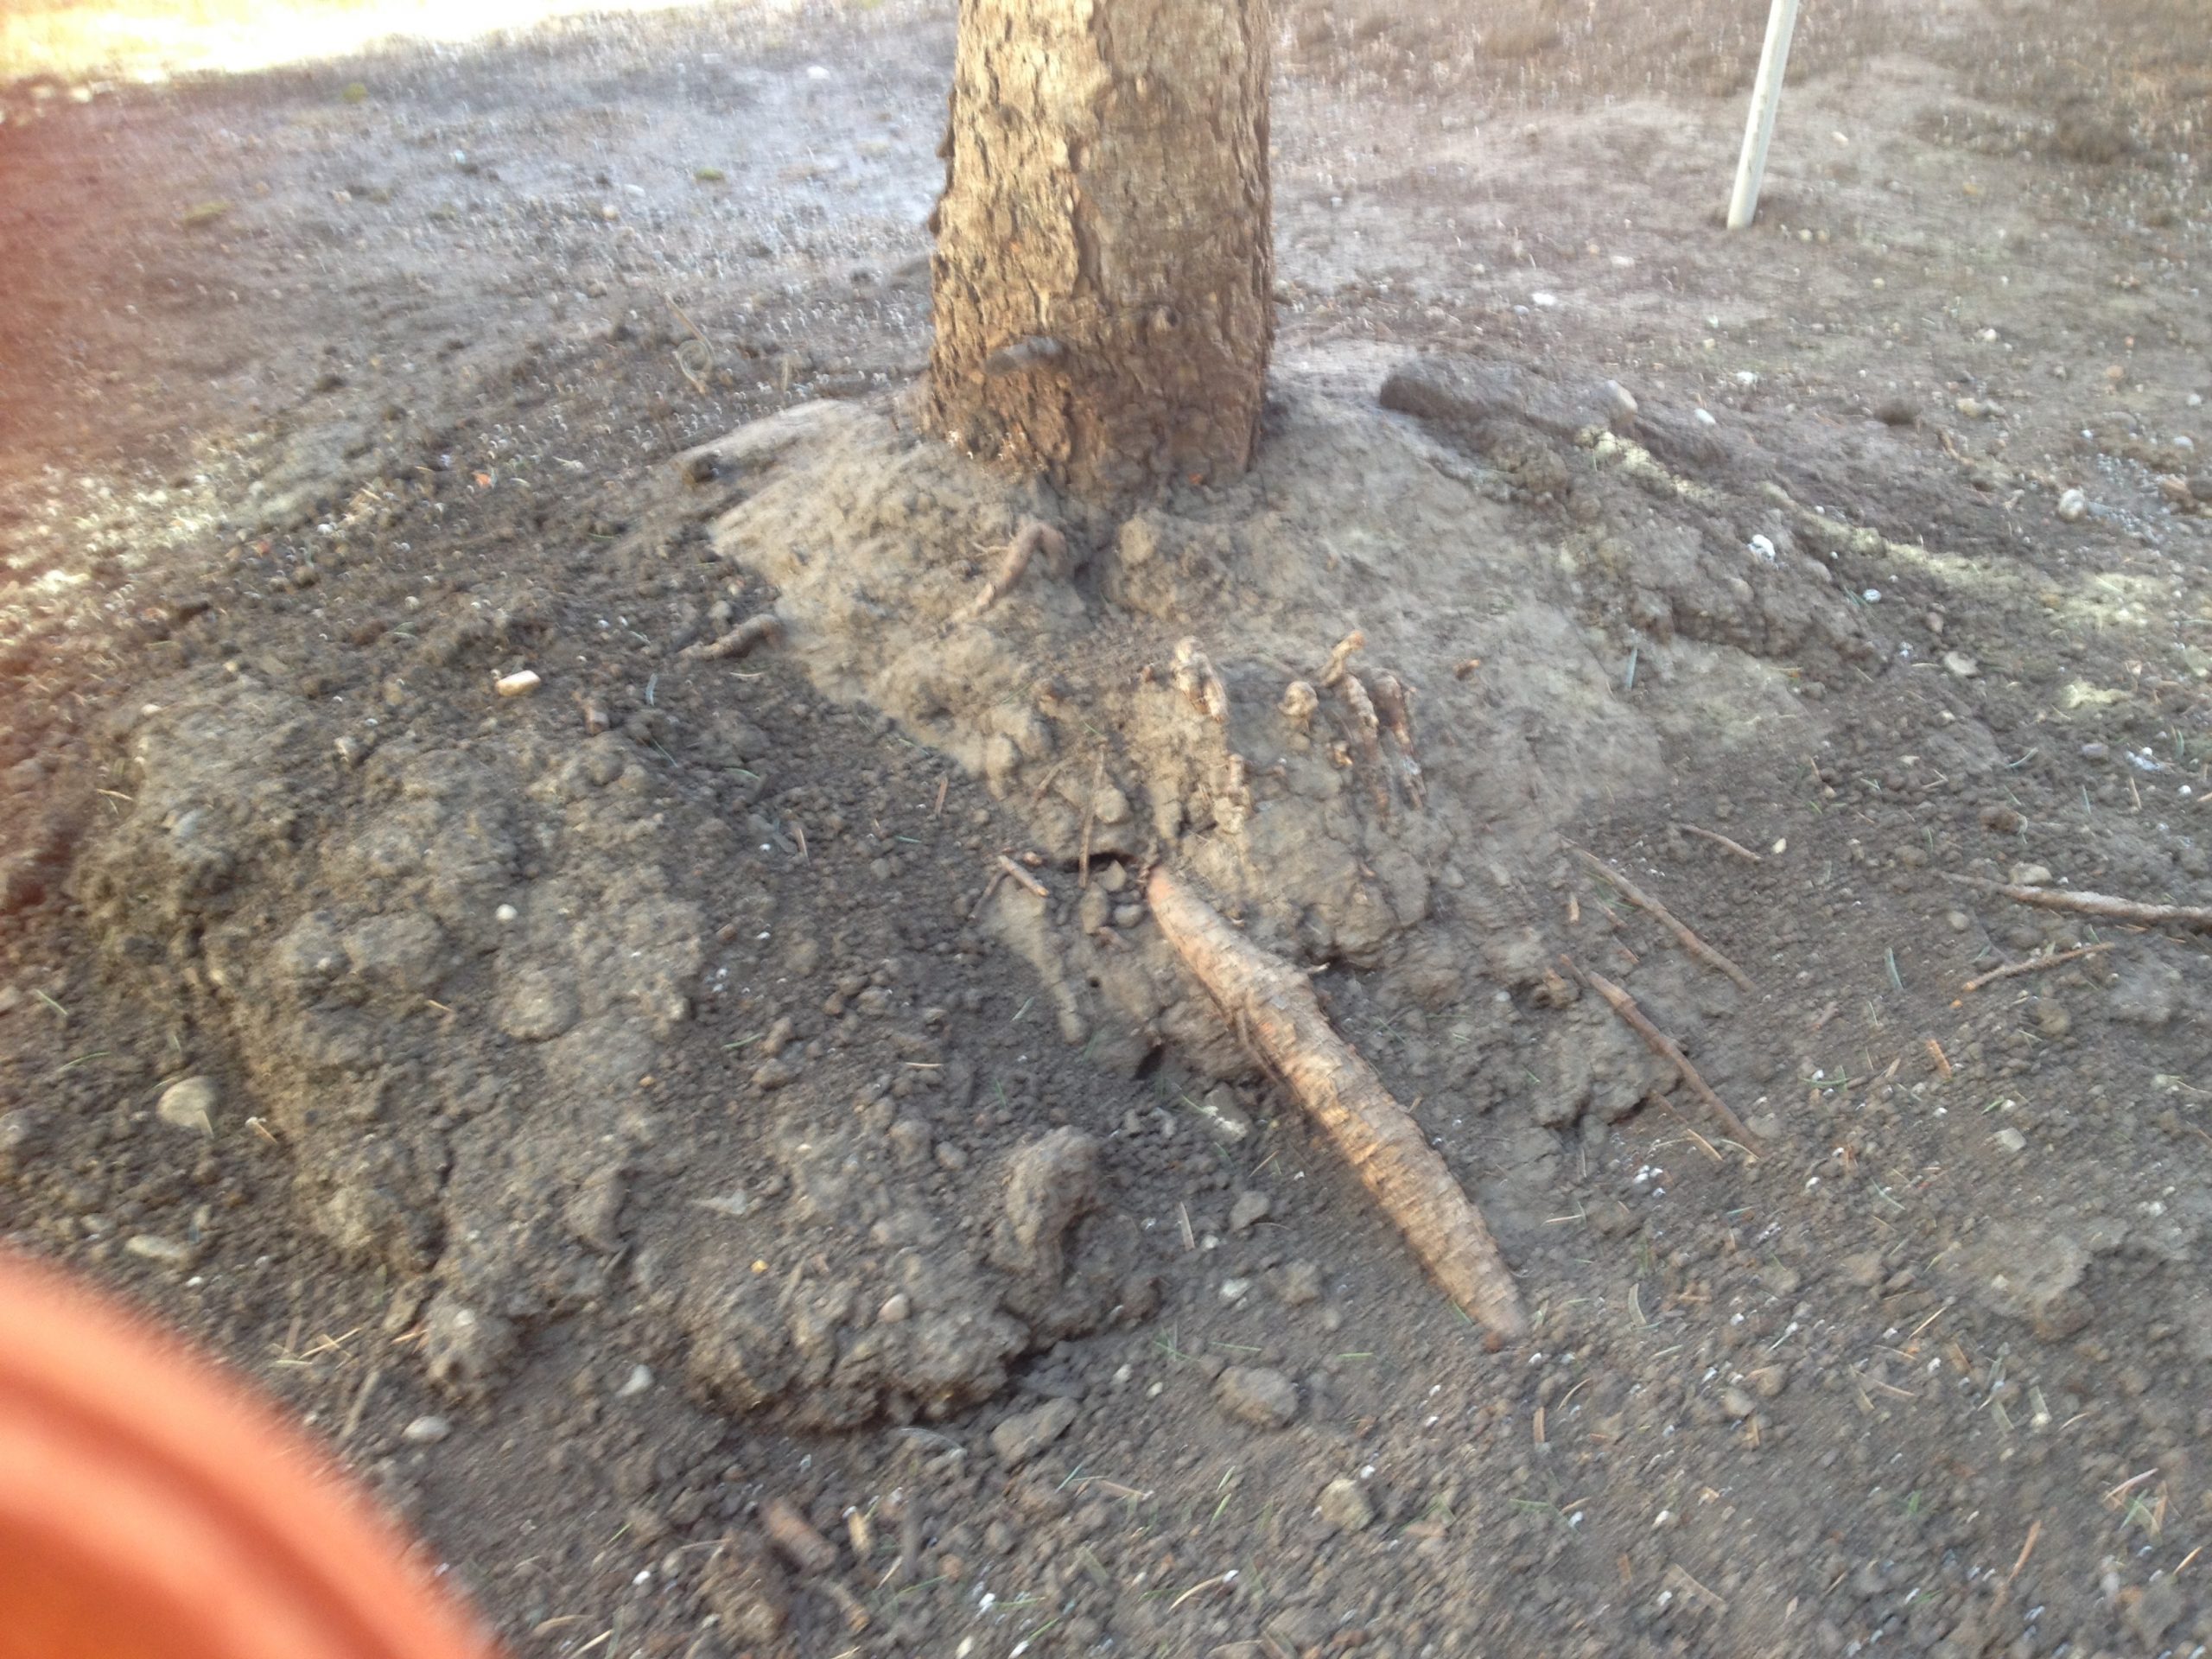 When soil is piled up naturally, or by machine it can cause all kinds of trouble for trees